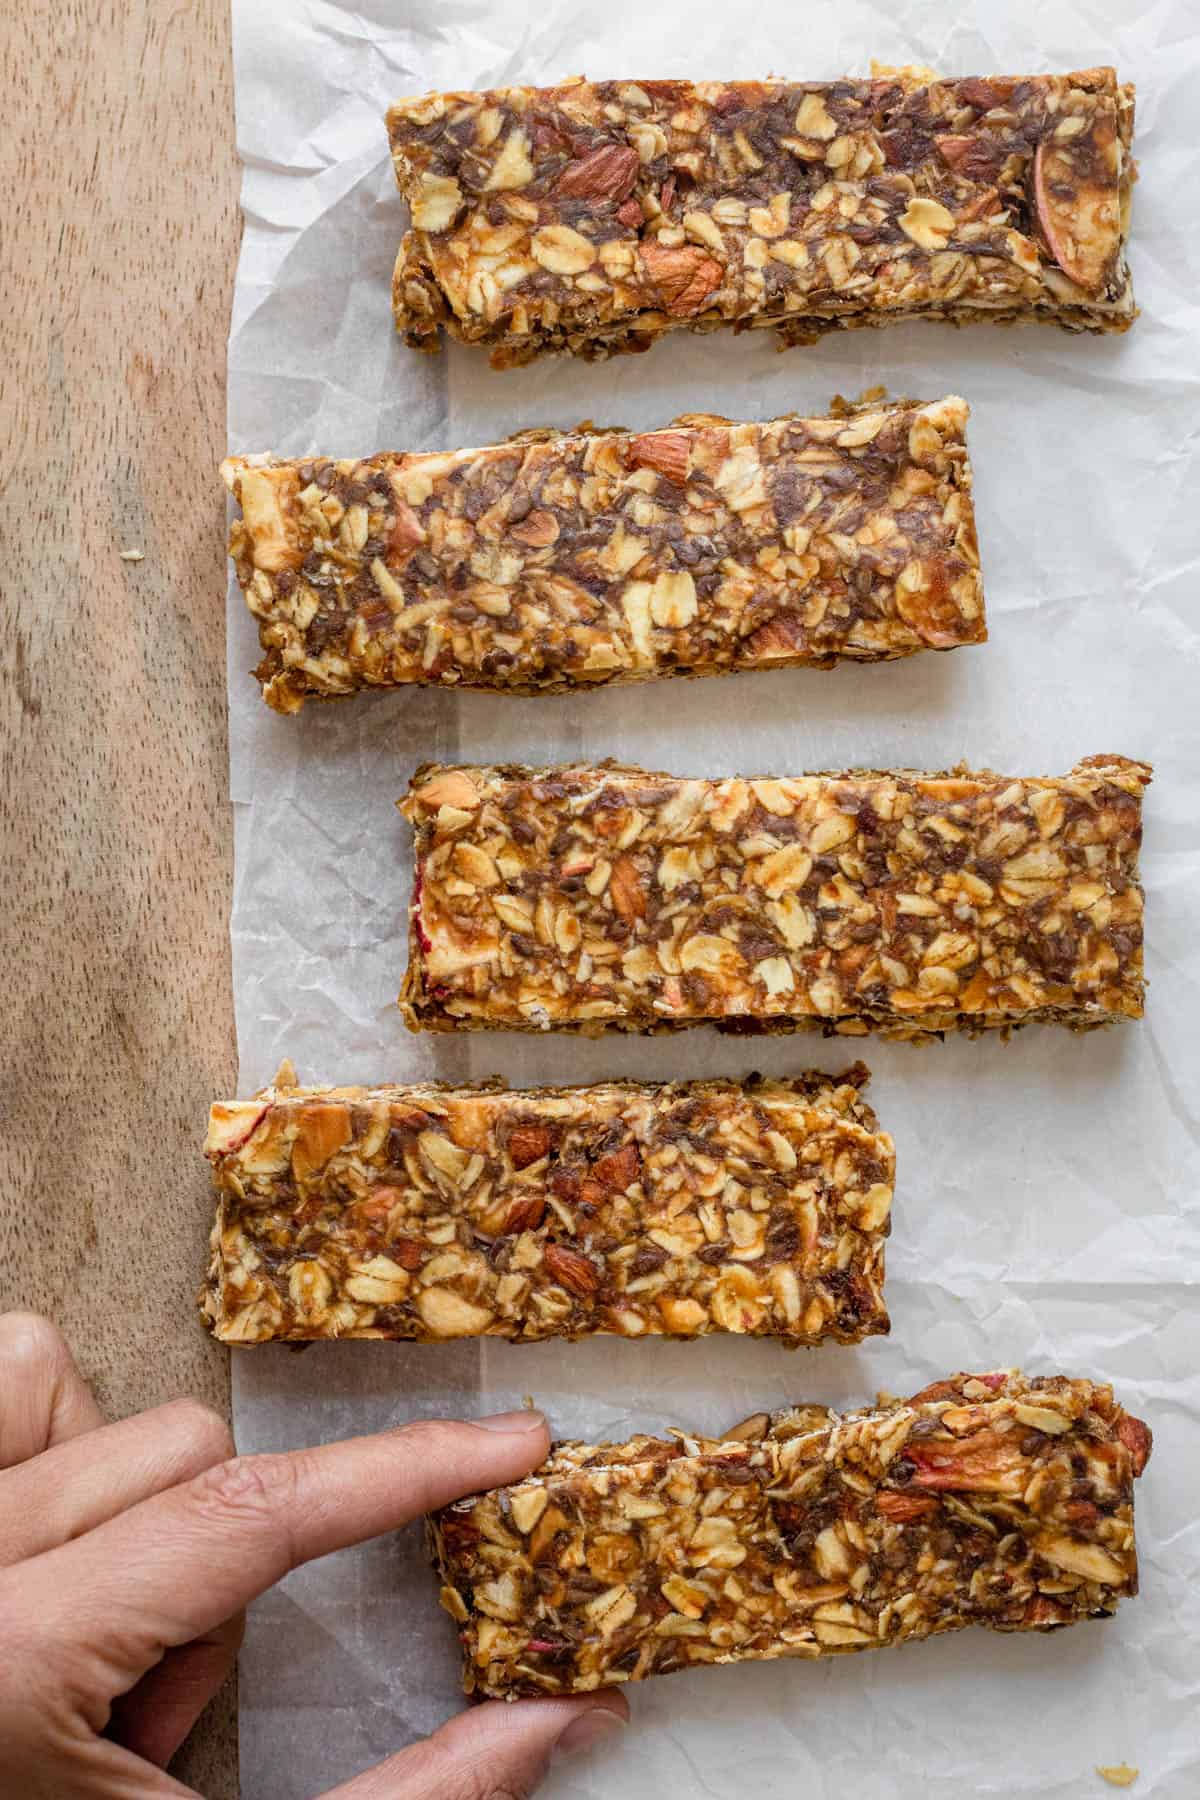 7 Protein-Packed Breakfast Bar Recipes